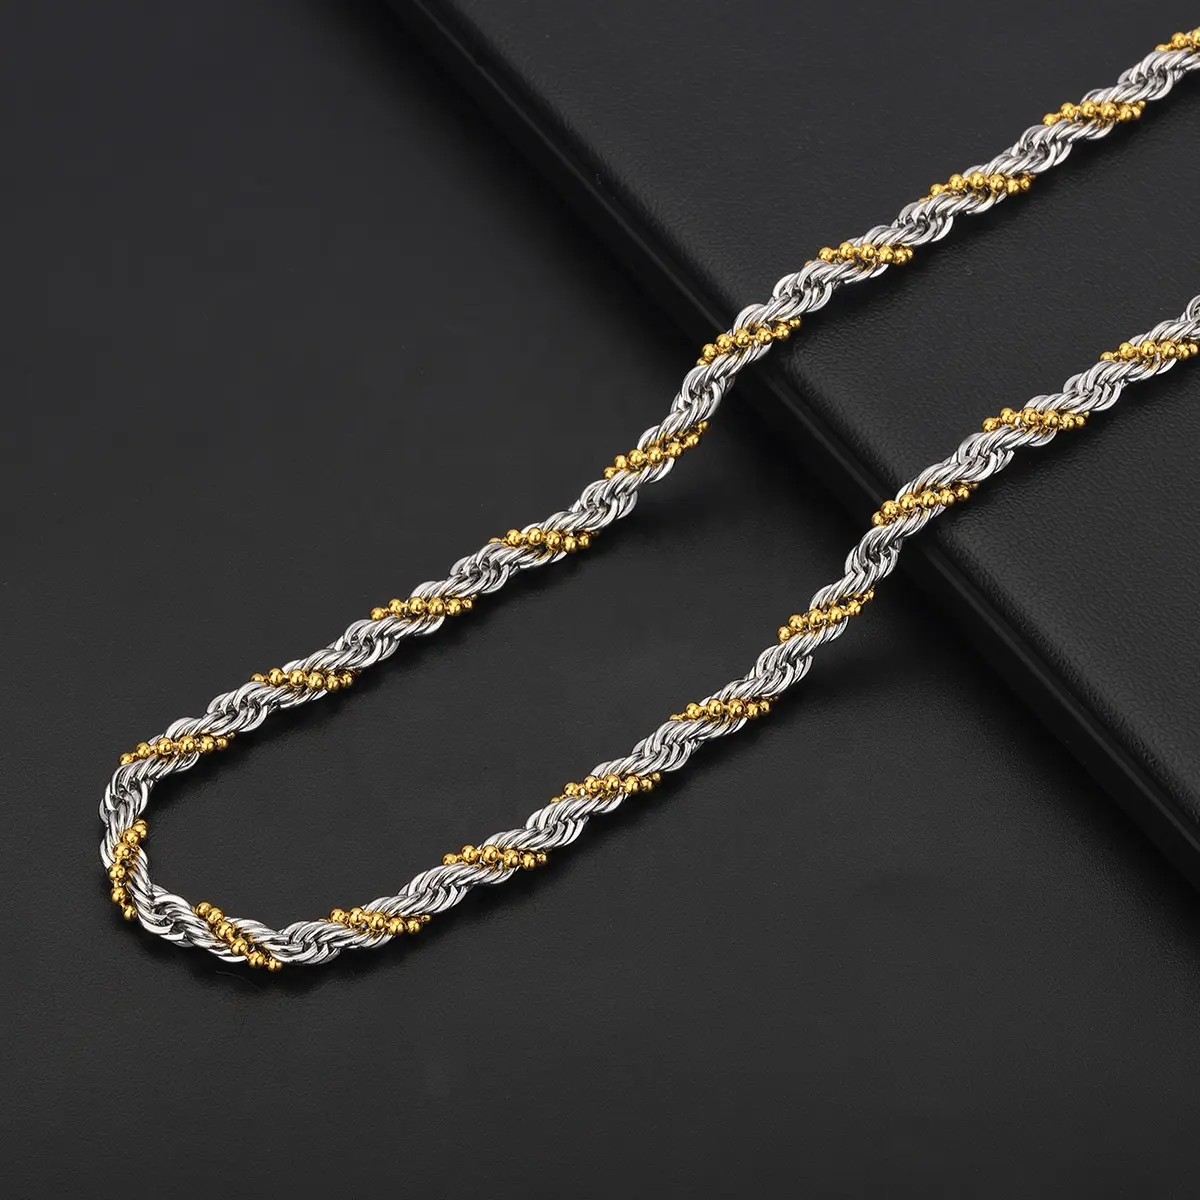 New Design Stainless Steel Mixed Color Gold Plated 18K Twist Bead Rope Chain Necklace Men